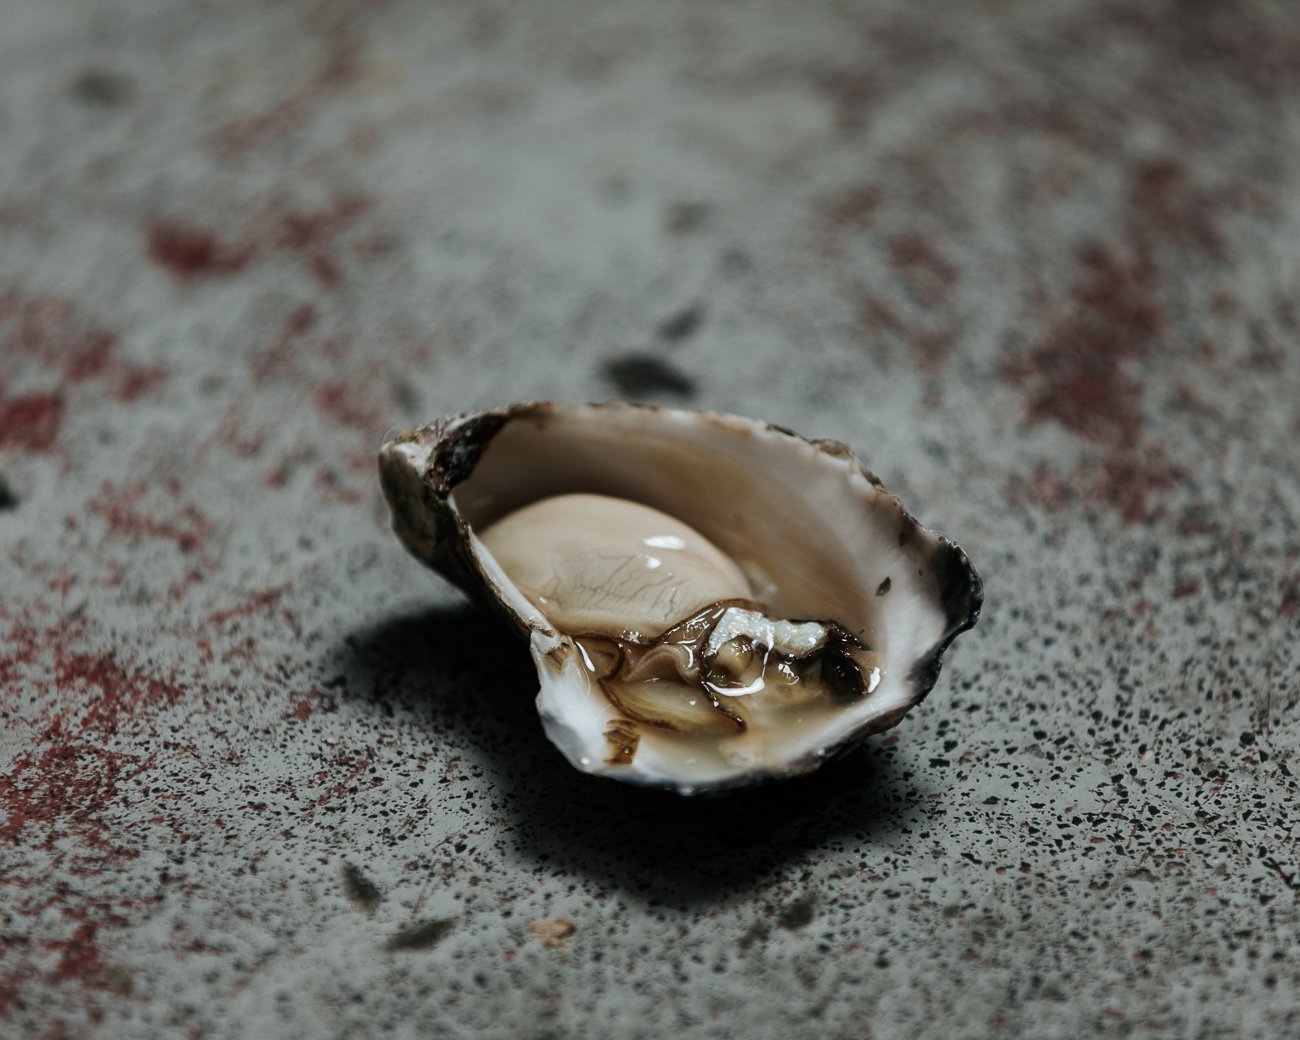 Rock Oysters, Shucked